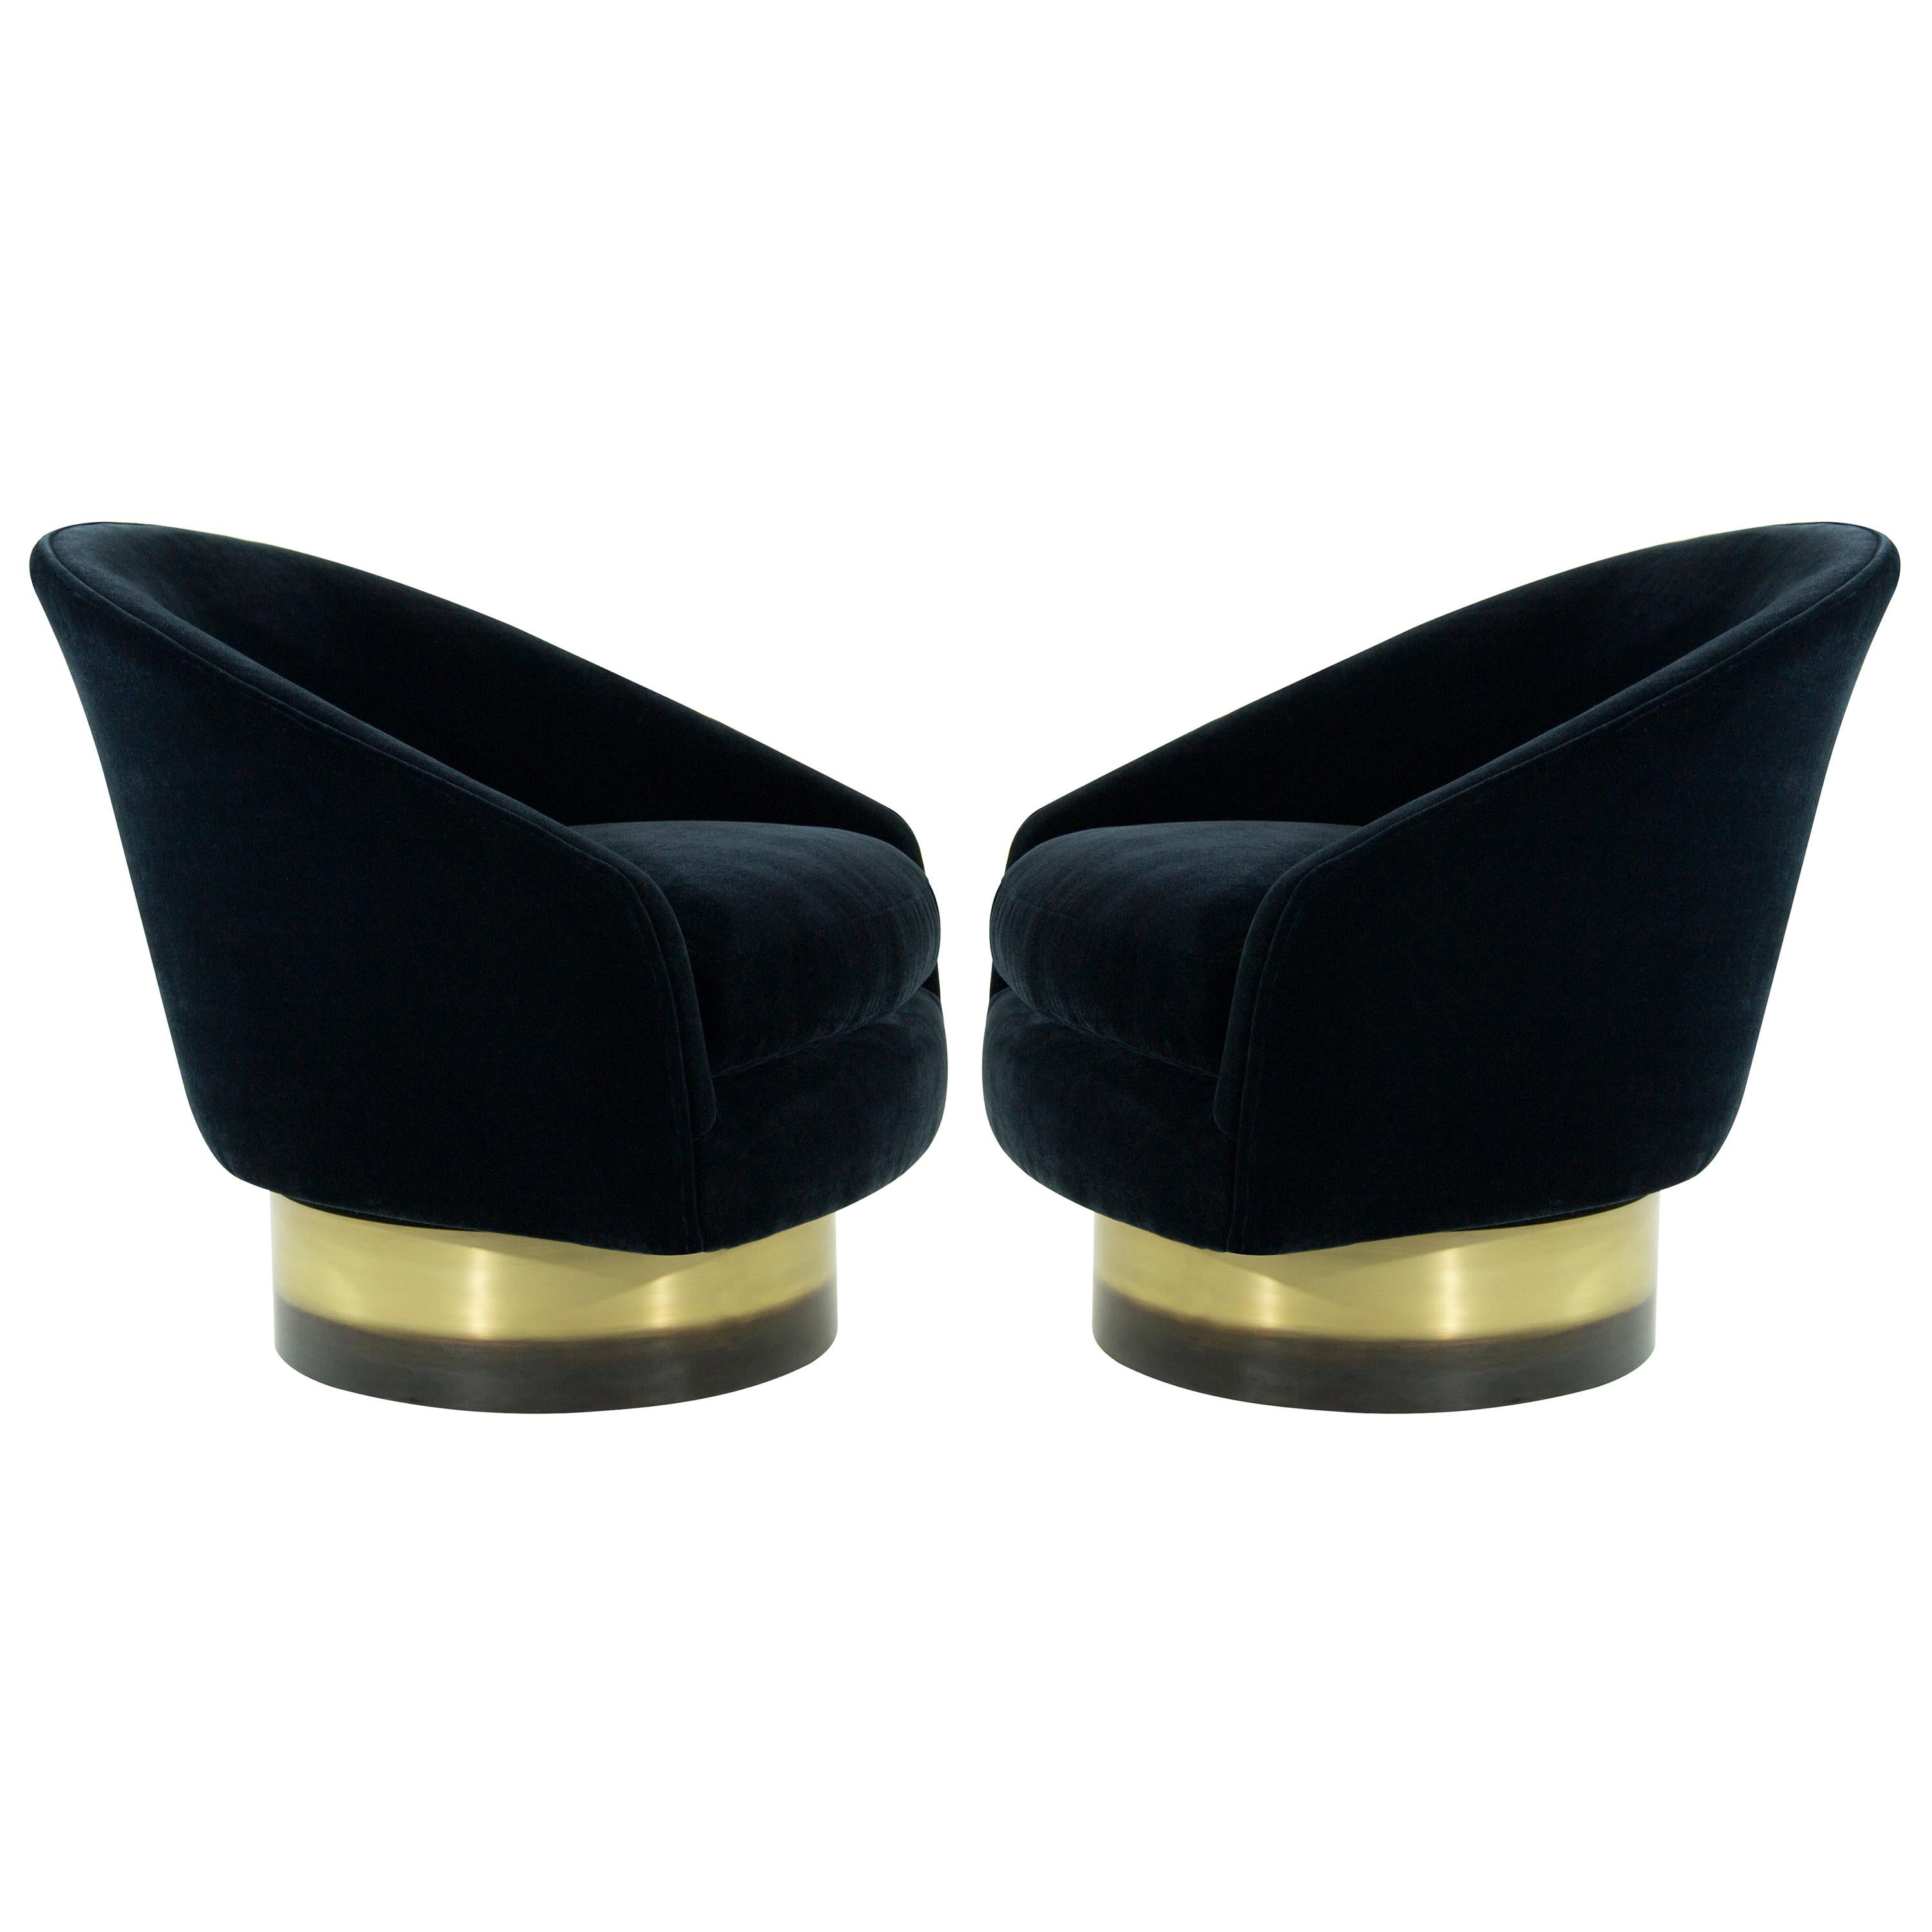 Adrian Pearsall for Craft Associates Swivel Chairs on Brass Bases